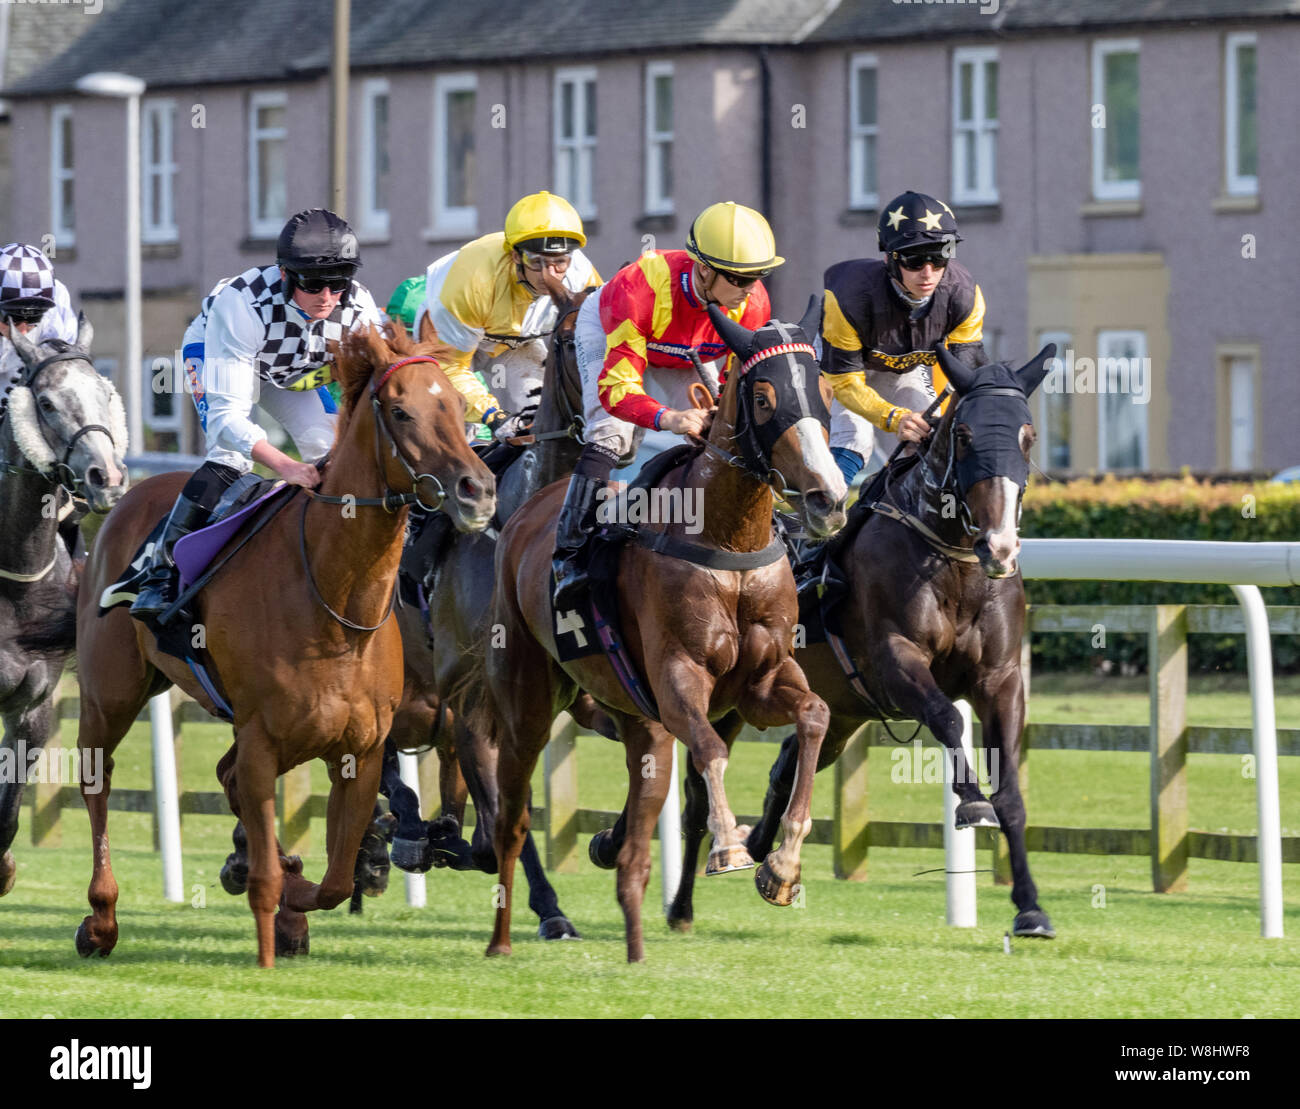 Musselburgh Races - 9th August 2019 - Jockey Harrison Shaw (plain black hat) on Economic Crisis, winner of the 'Boogie In The Morning Handicap' Stock Photo